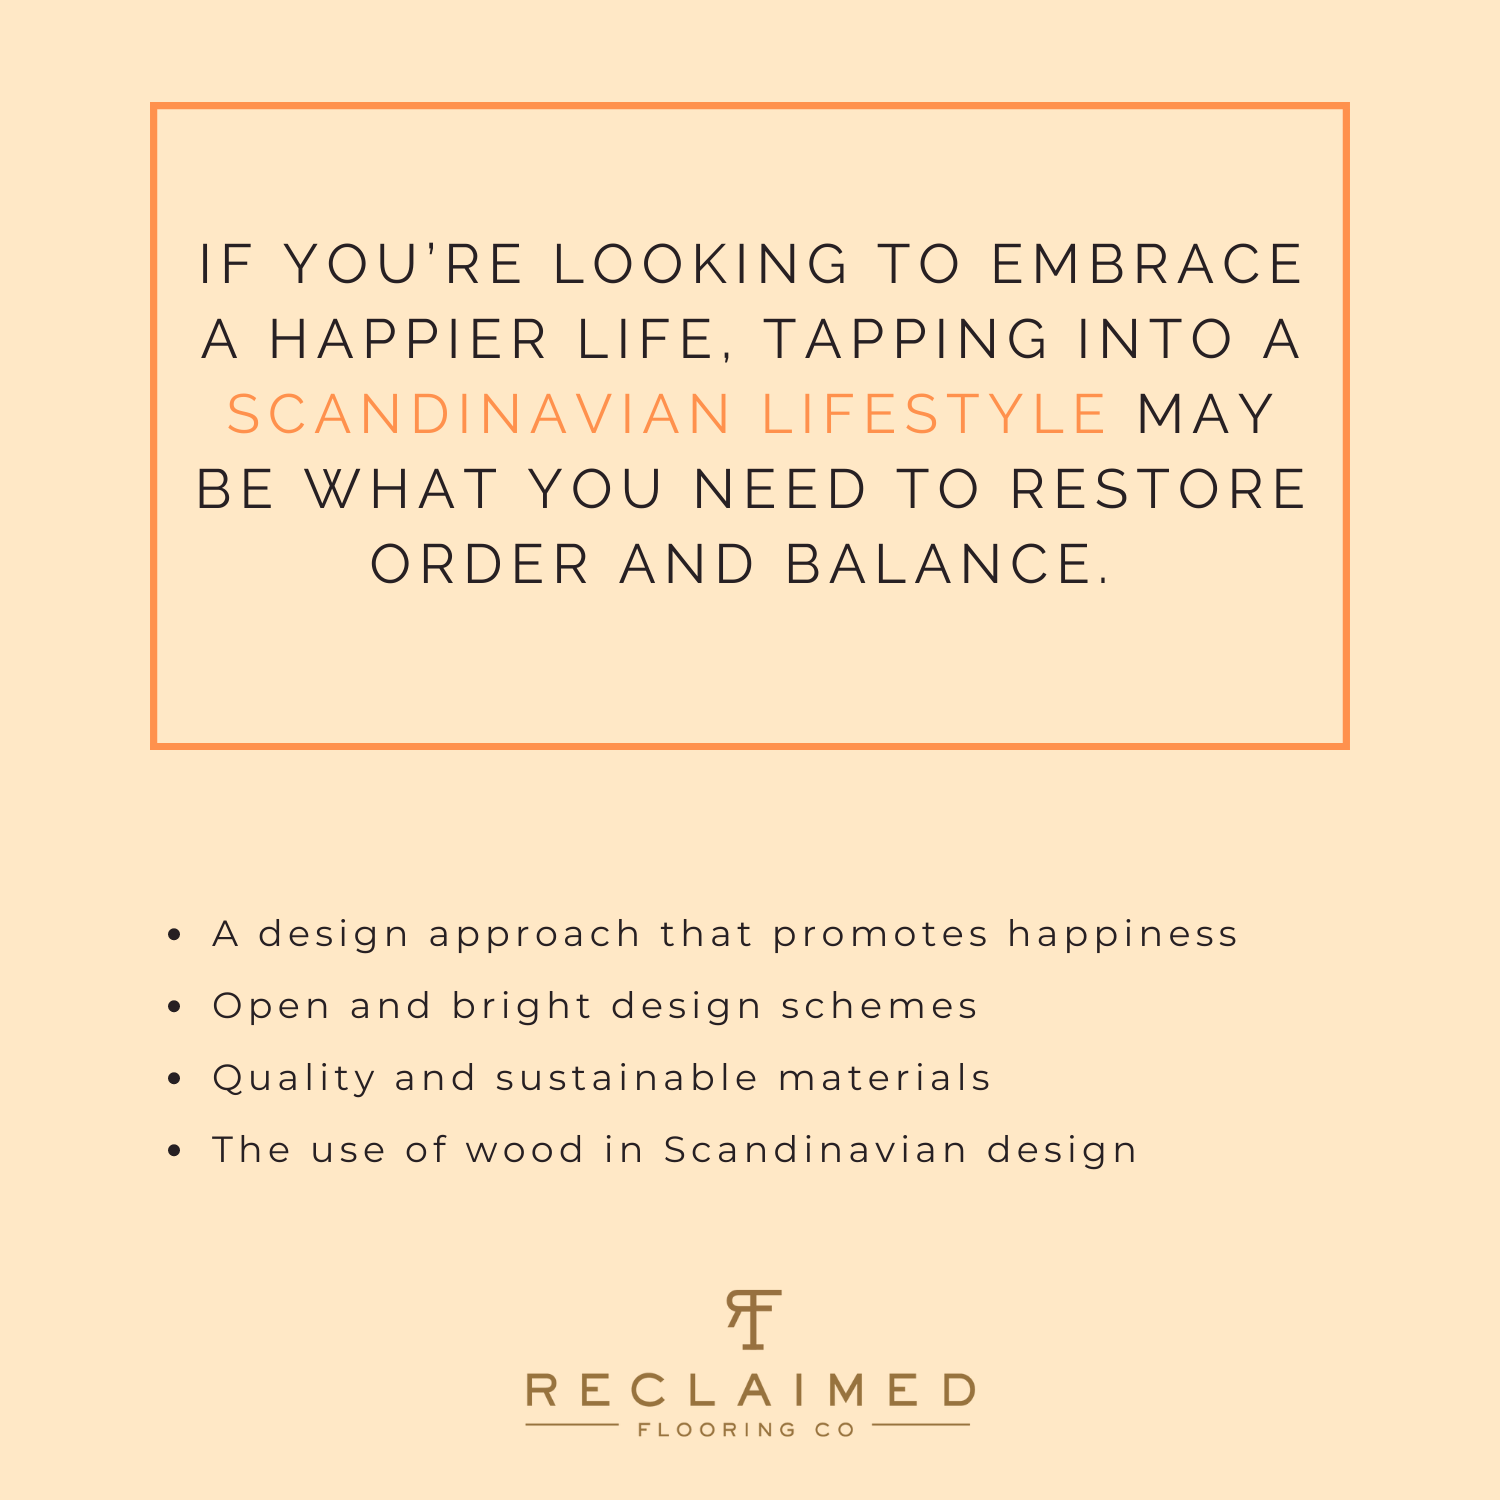 •	A Scandinavian design approach that promotes happiness •	Open and bright design schemes •	Quality and sustainable materials  •	The use of wood in Scandinavian design